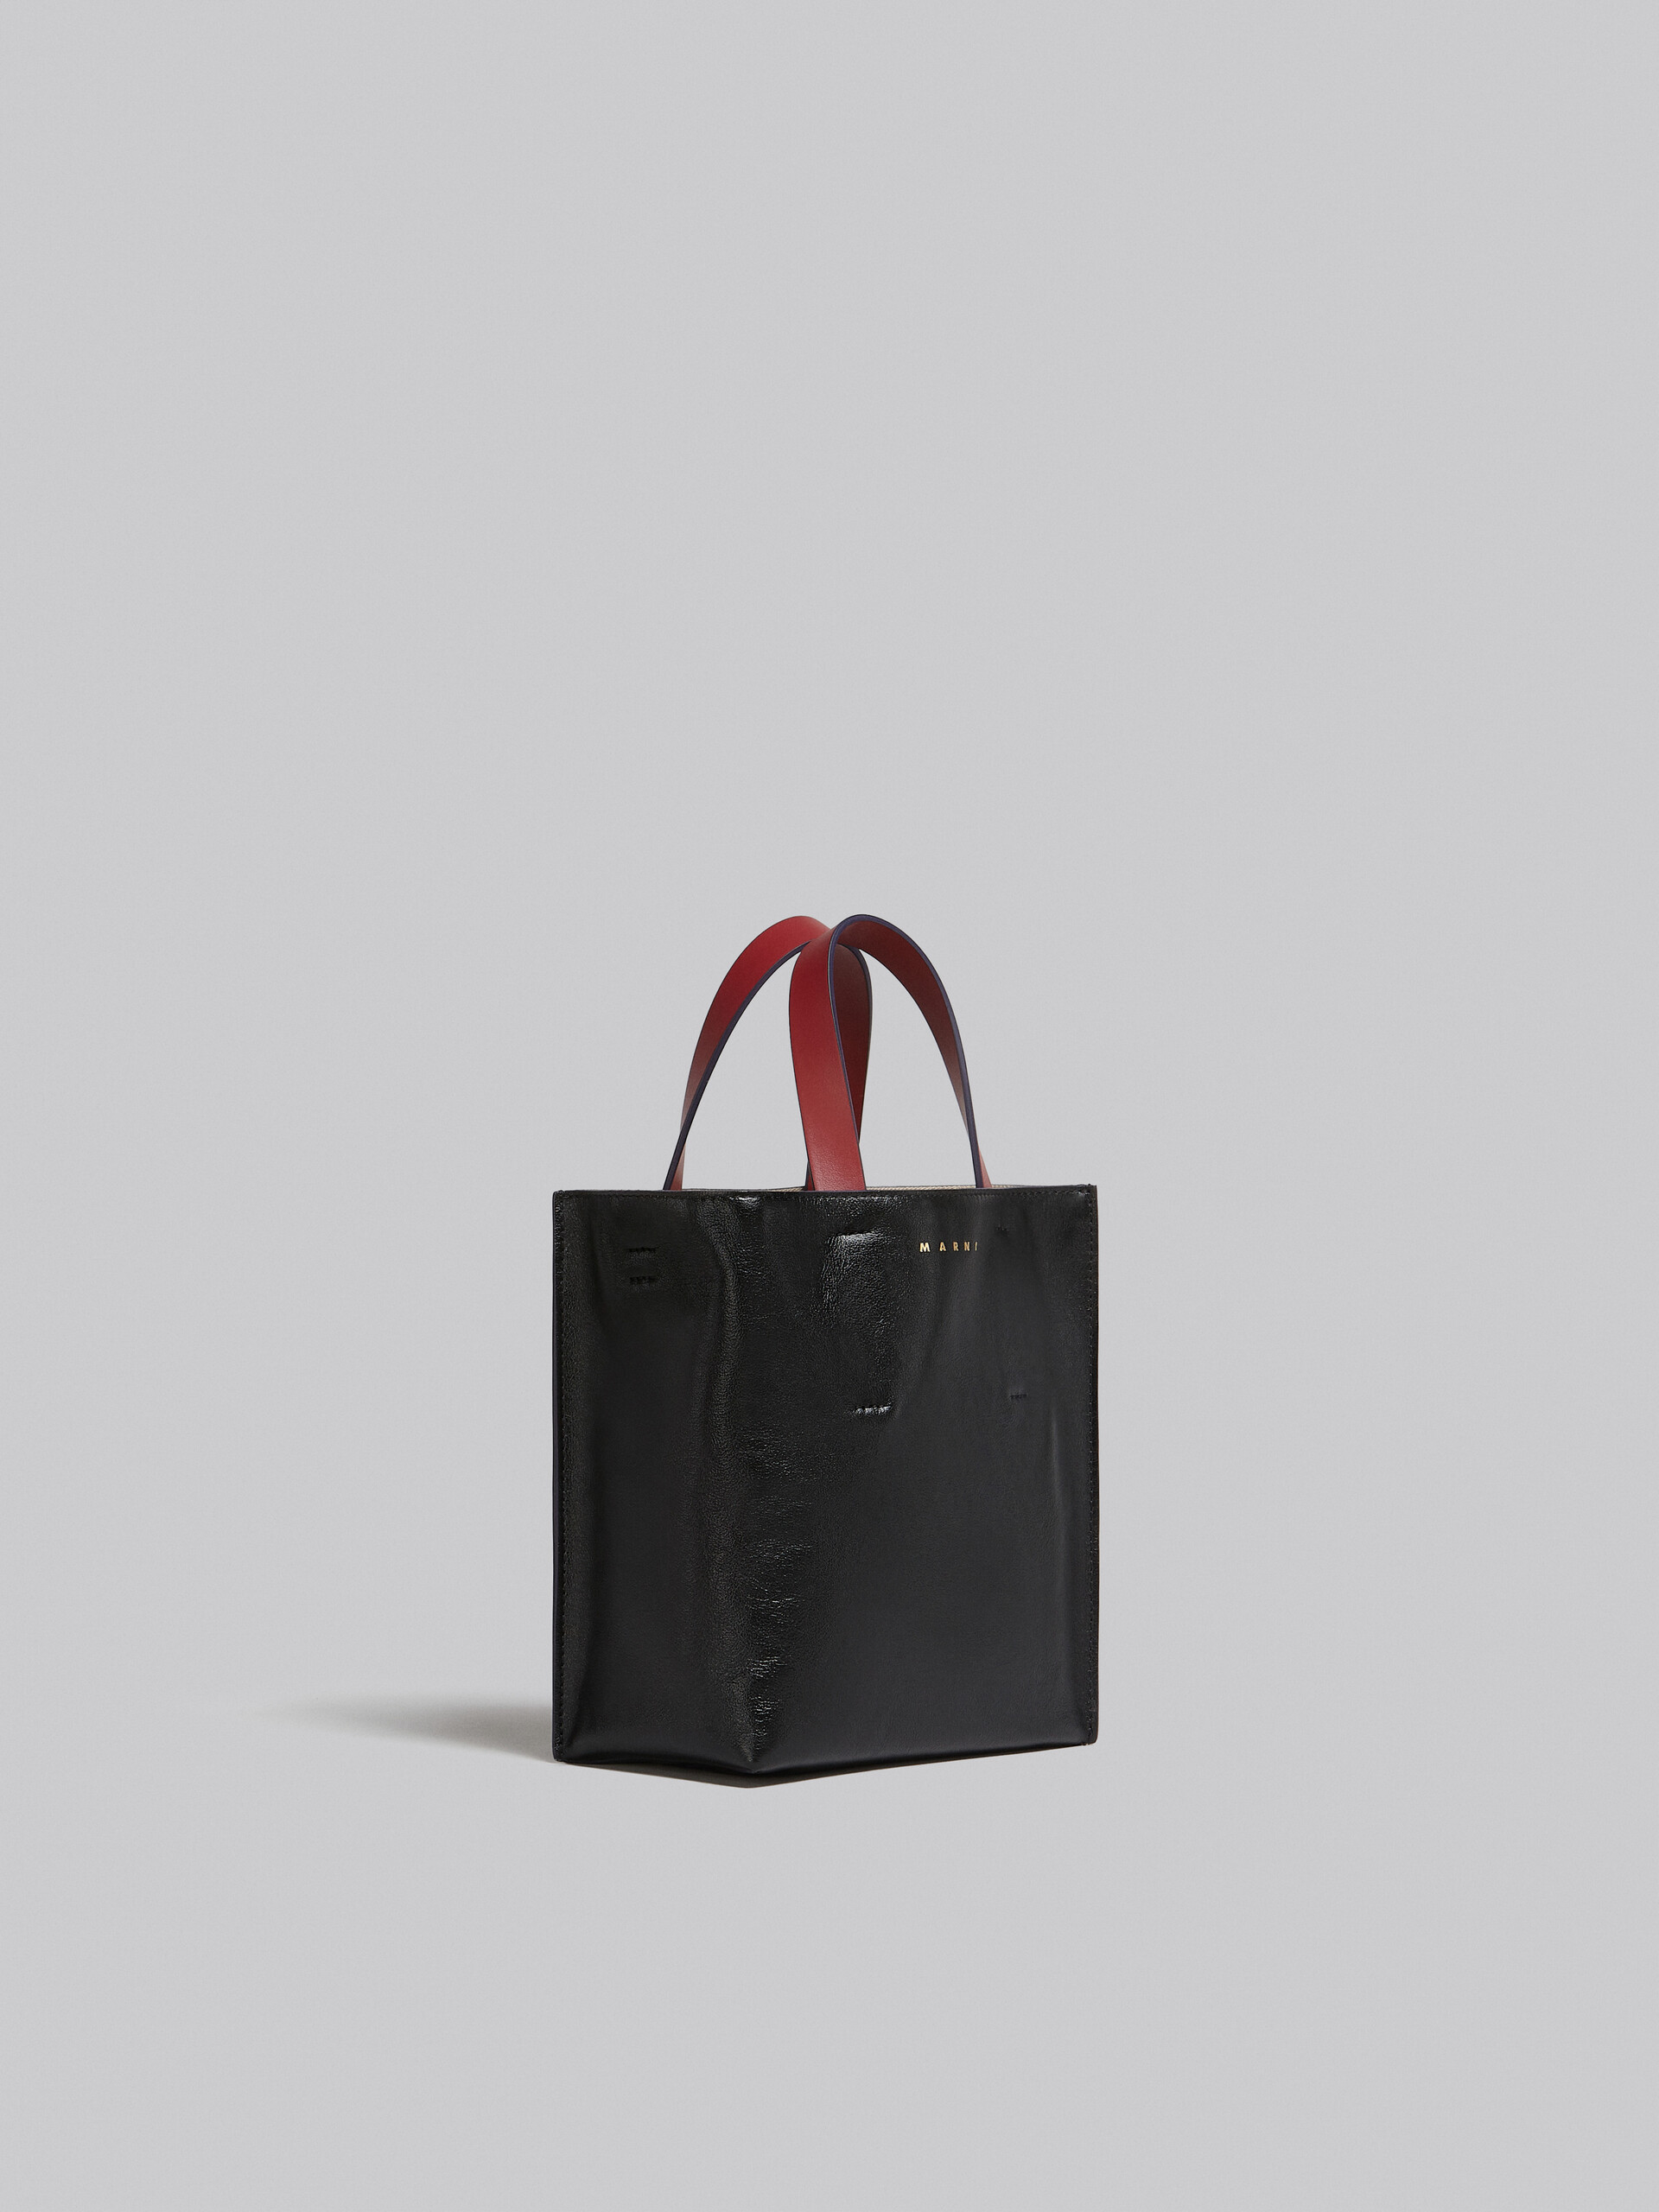 Museo Soft Mini Bag in grey black and red leather - Shopping Bags - Image 6